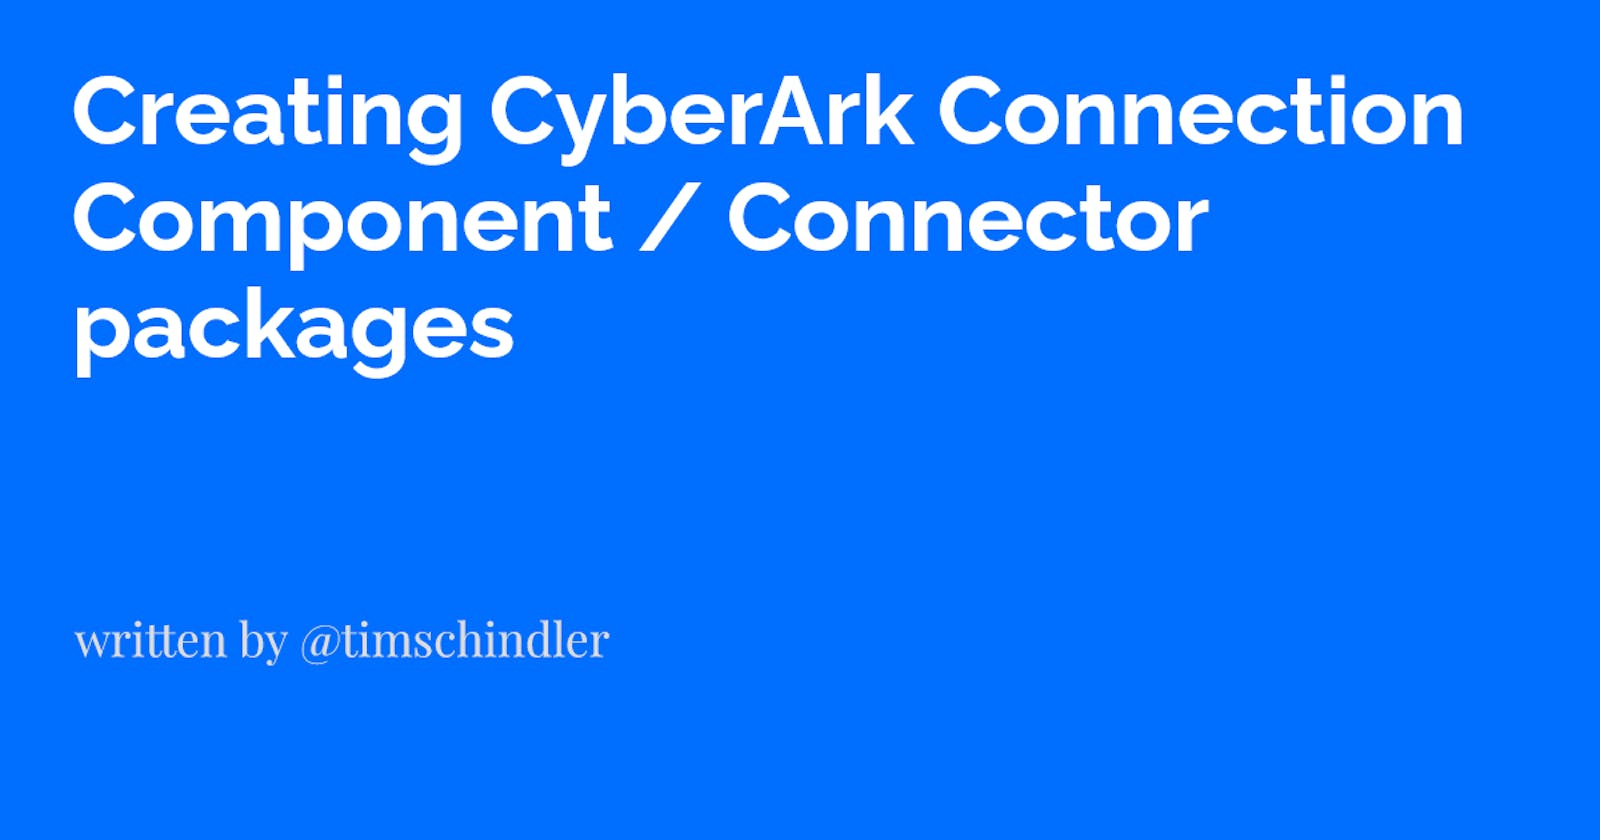 Creating CyberArk Connection Component / Connector packages